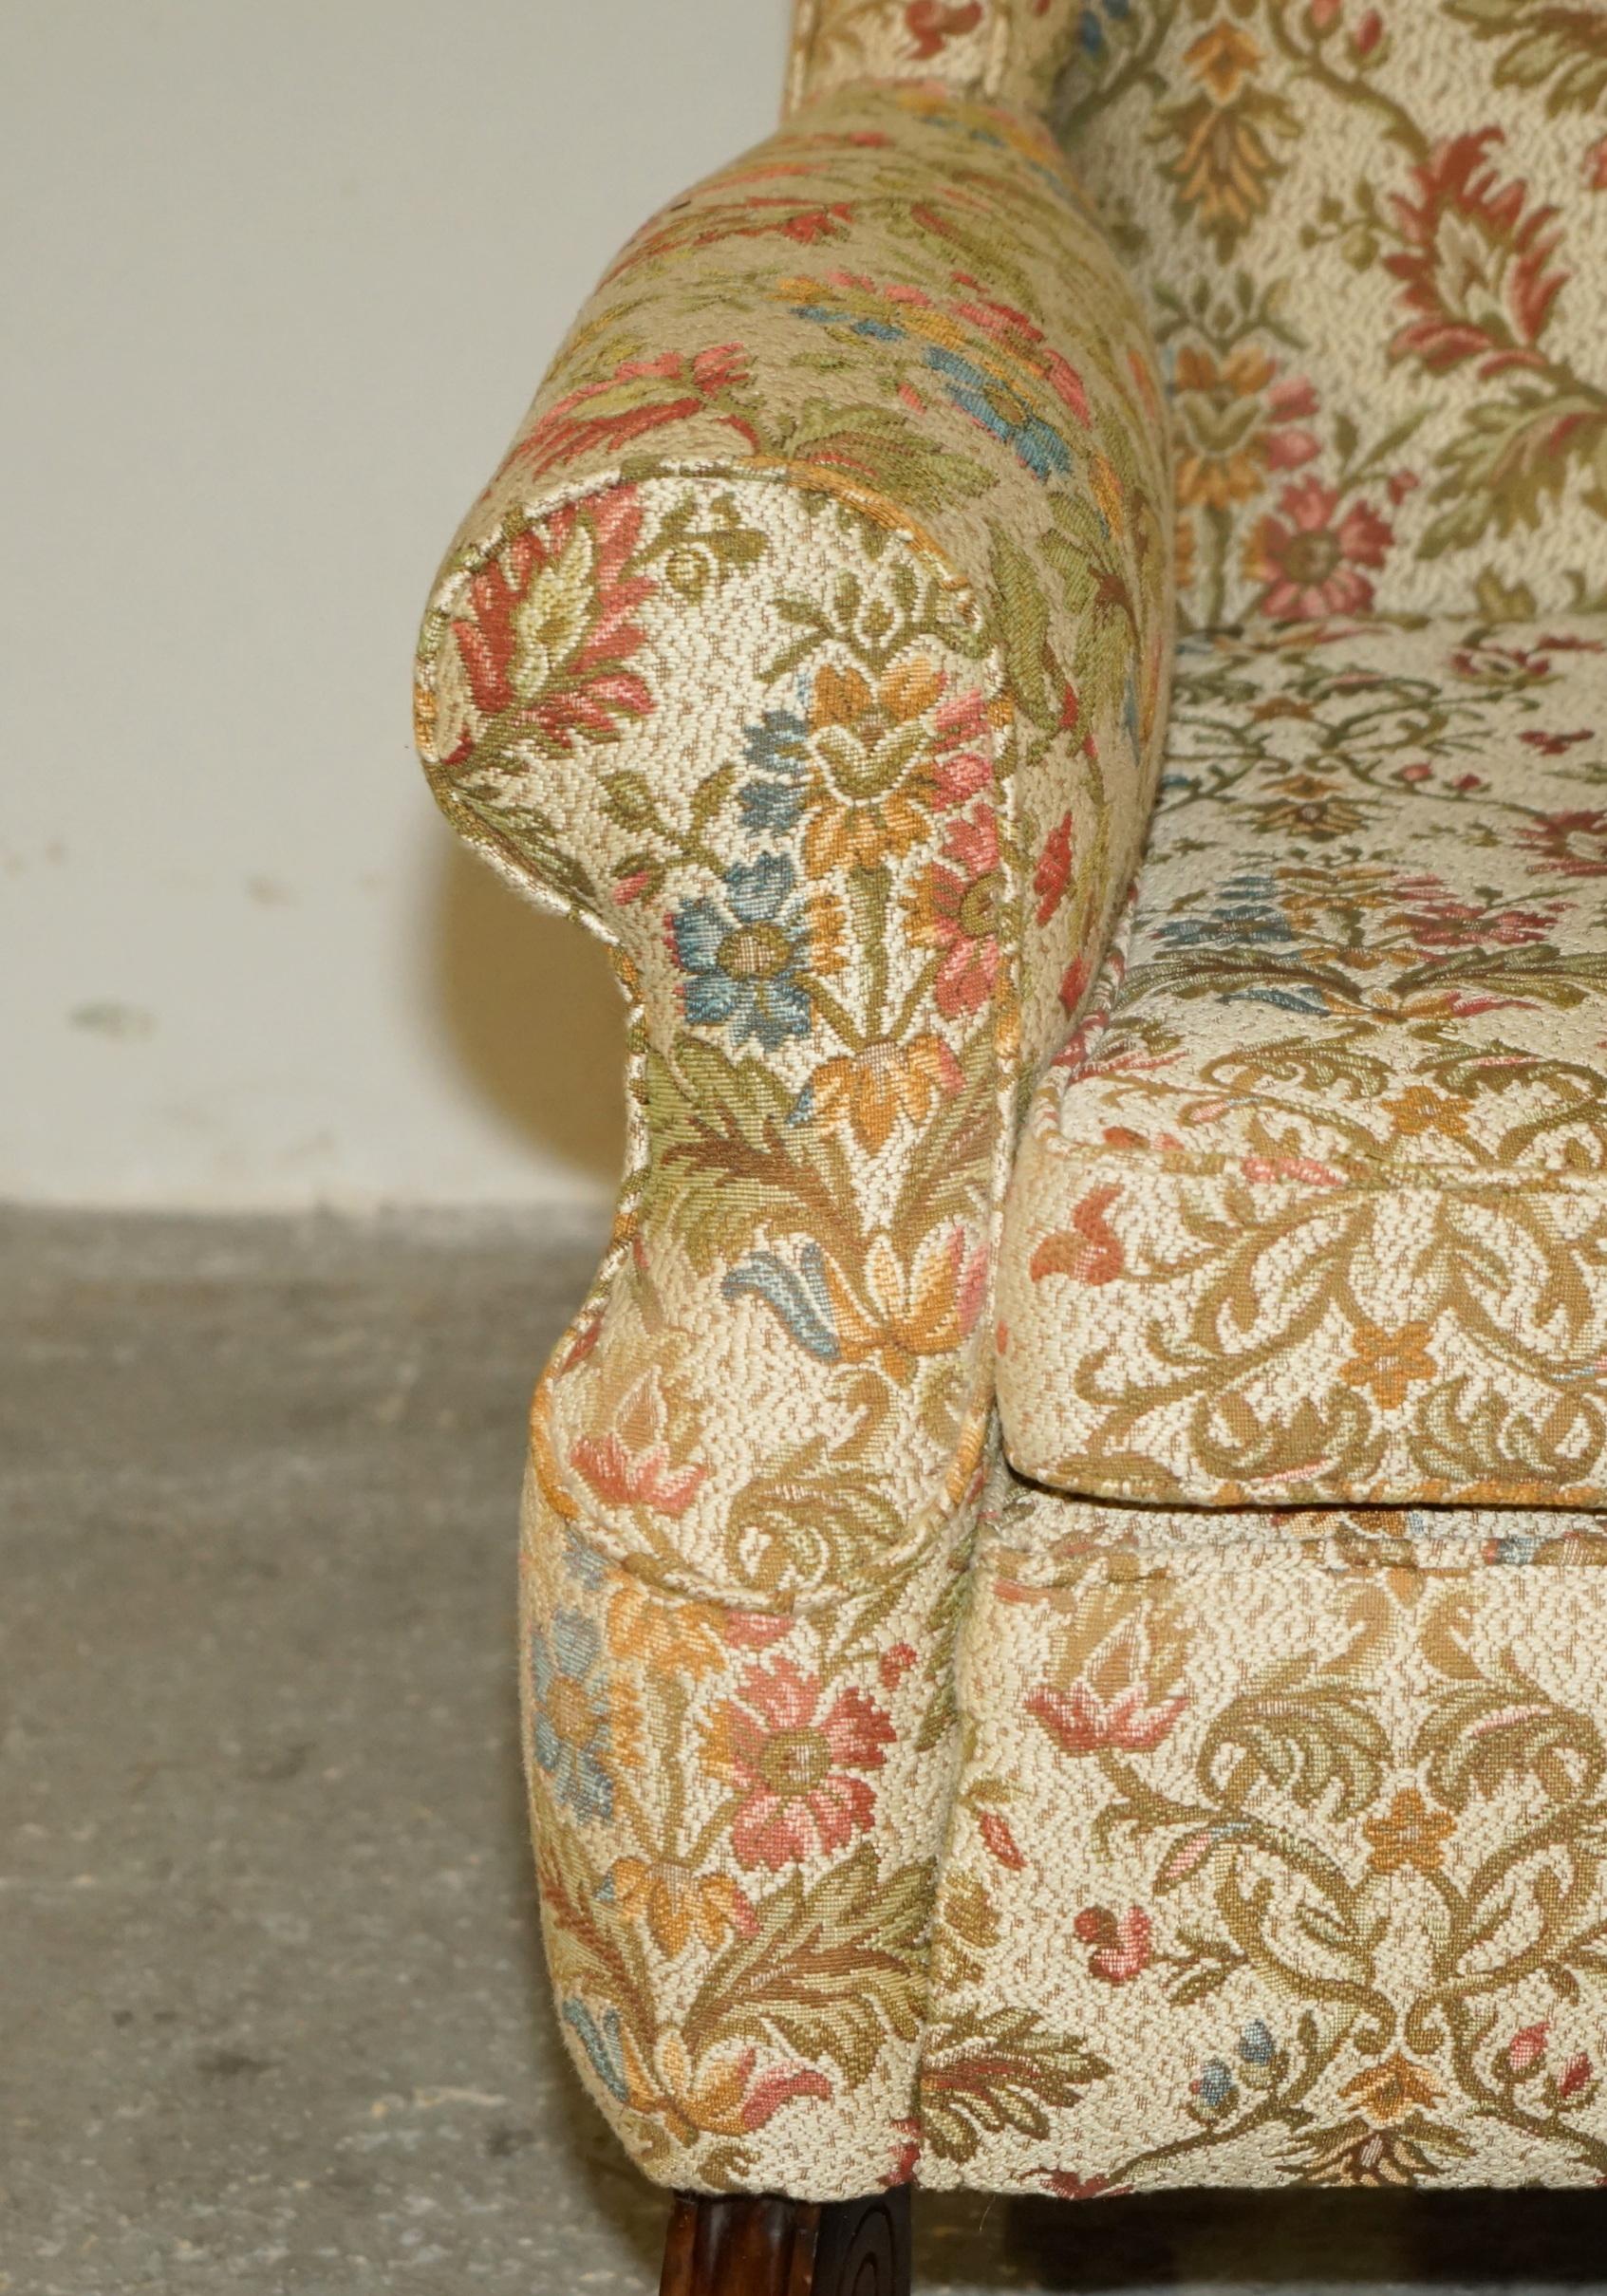 Late 19th Century PAIR OF ANTIQUE ITALIAN CAROLEAN HIGH BACK WiNGBACK ARMCHAIRS FOR UPHOLSTERY For Sale